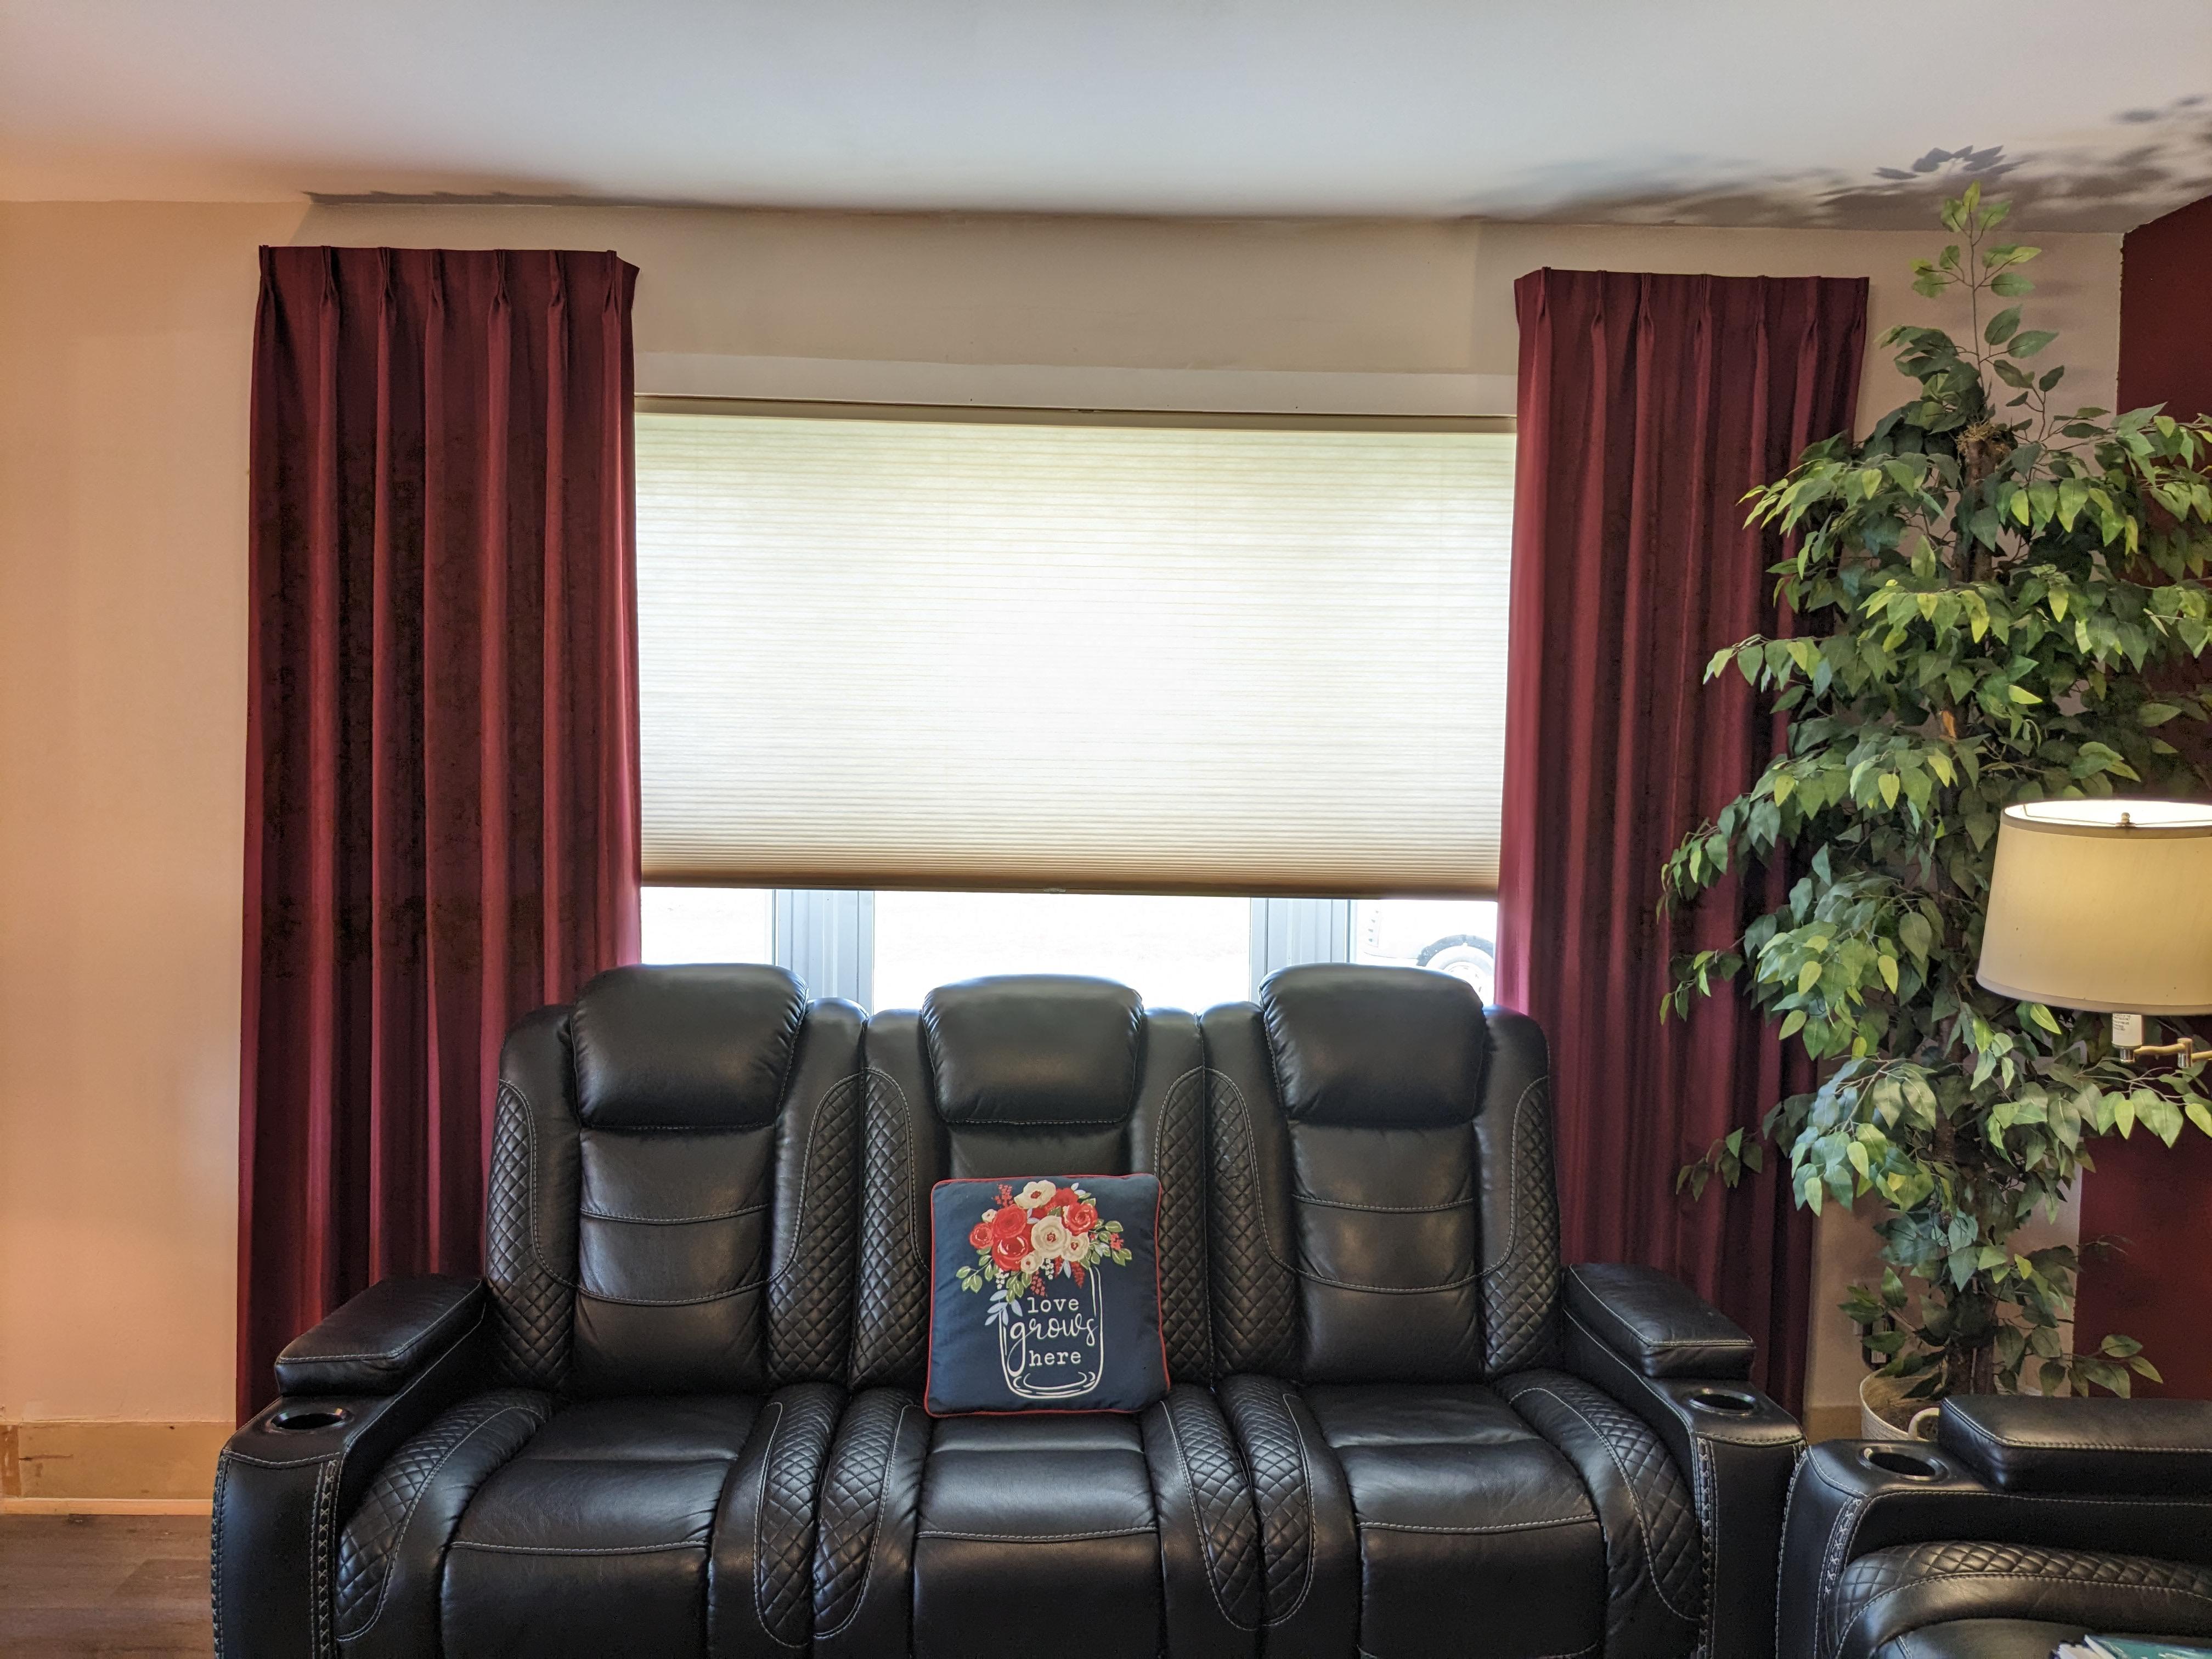 Light filtering cordless cellular shade with stationary side panel drapery in Springfield Illinois living room.  BudgetBlinds  WindowCoverings  Shades  Drapery